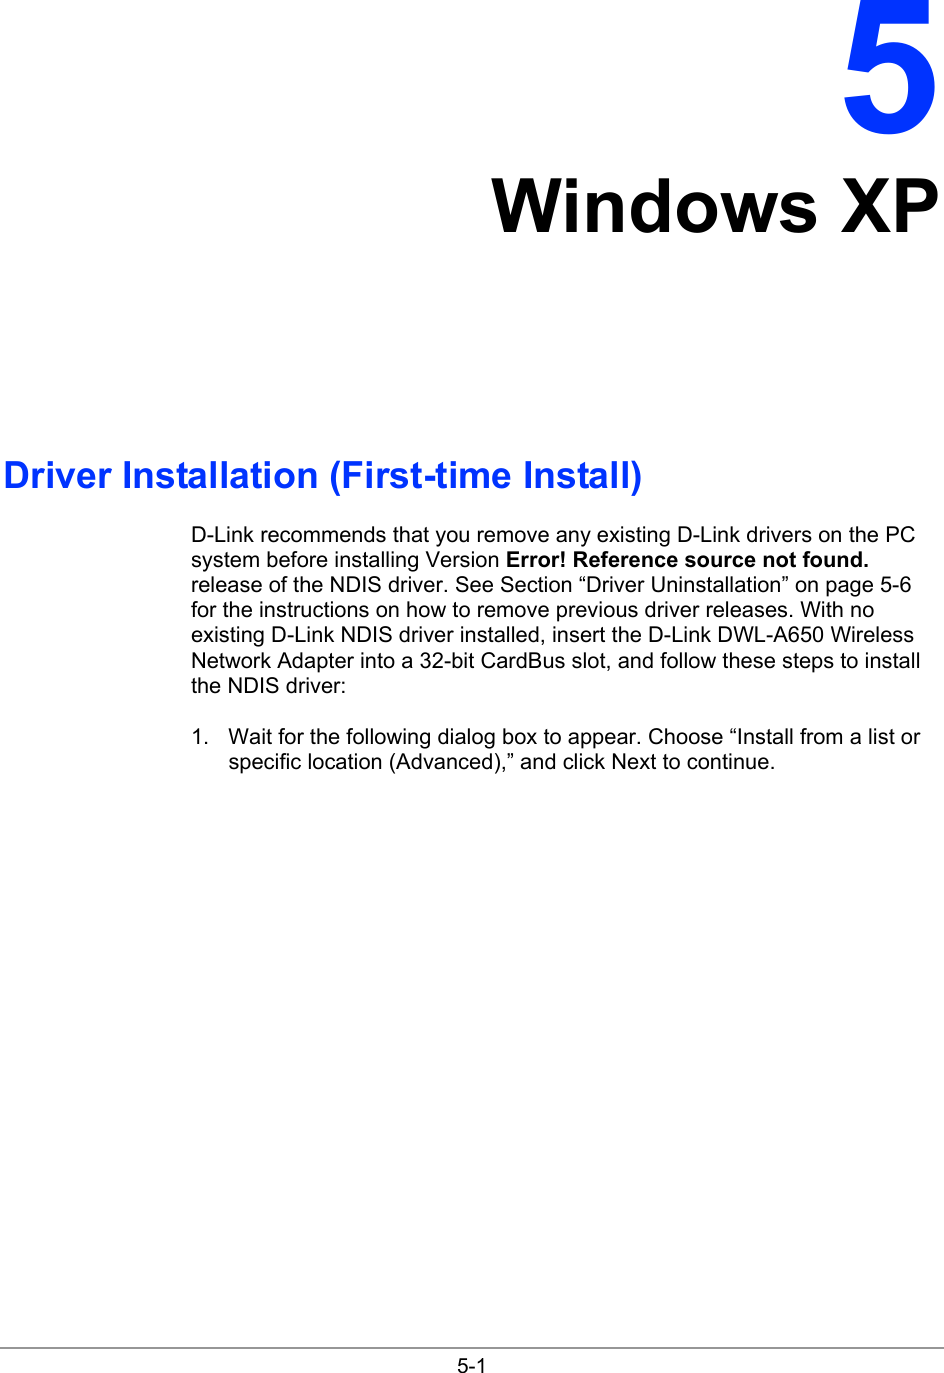  5-1 5 Windows XP Driver Installation (First-time Install) D-Link recommends that you remove any existing D-Link drivers on the PC system before installing Version Error! Reference source not found. release of the NDIS driver. See Section “Driver Uninstallation” on page 5-6 for the instructions on how to remove previous driver releases. With no existing D-Link NDIS driver installed, insert the D-Link DWL-A650 Wireless Network Adapter into a 32-bit CardBus slot, and follow these steps to install the NDIS driver: 1.  Wait for the following dialog box to appear. Choose “Install from a list or specific location (Advanced),” and click Next to continue. 